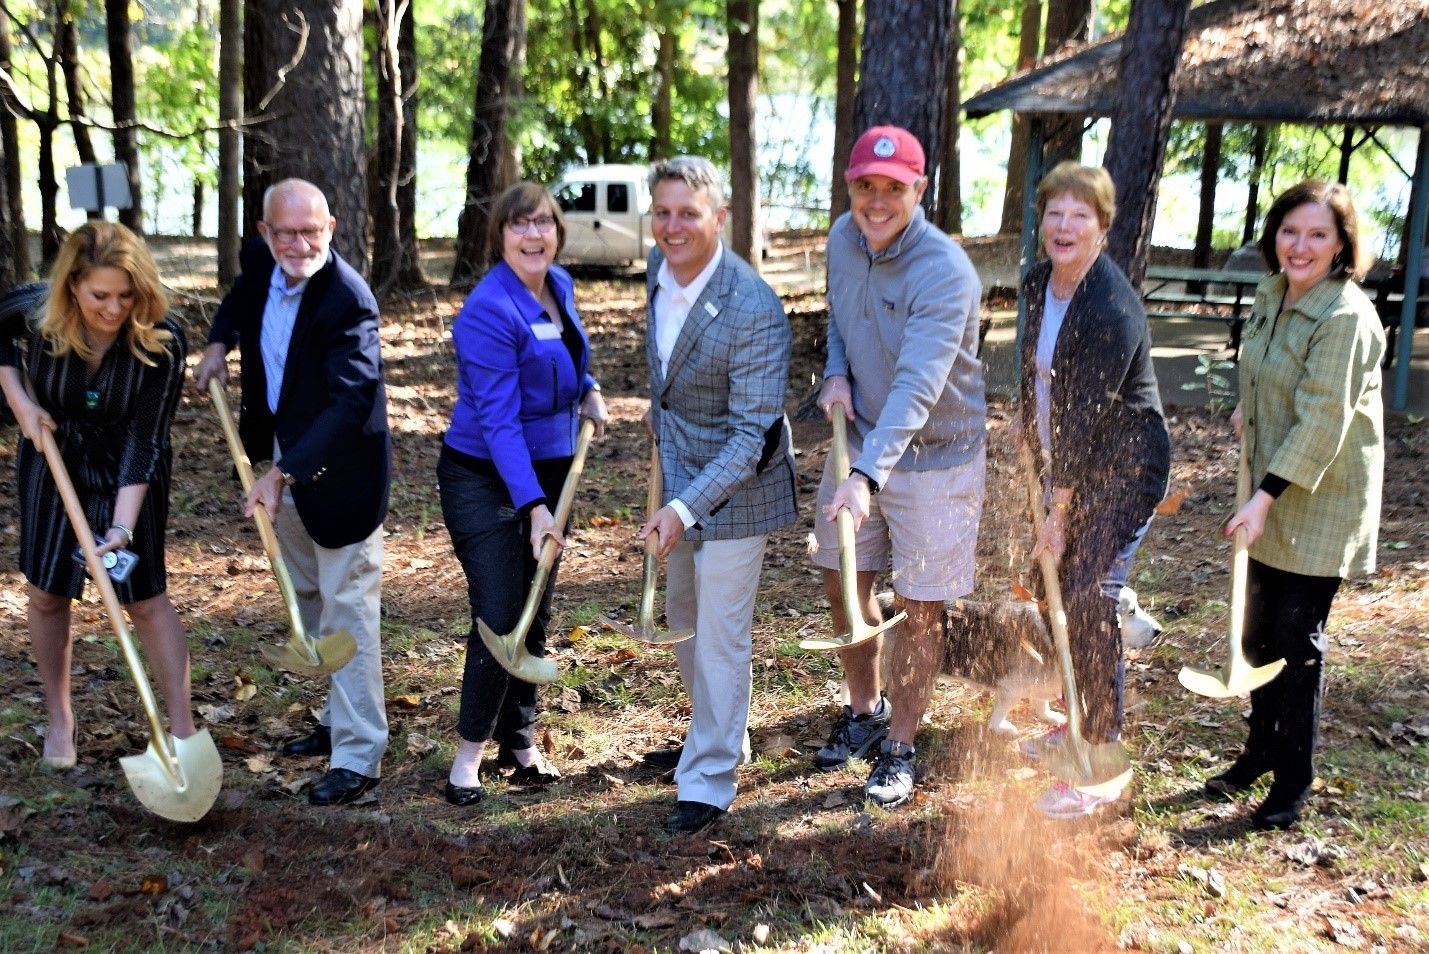 A group of Resurgens employees break ground on a new accessible playground.